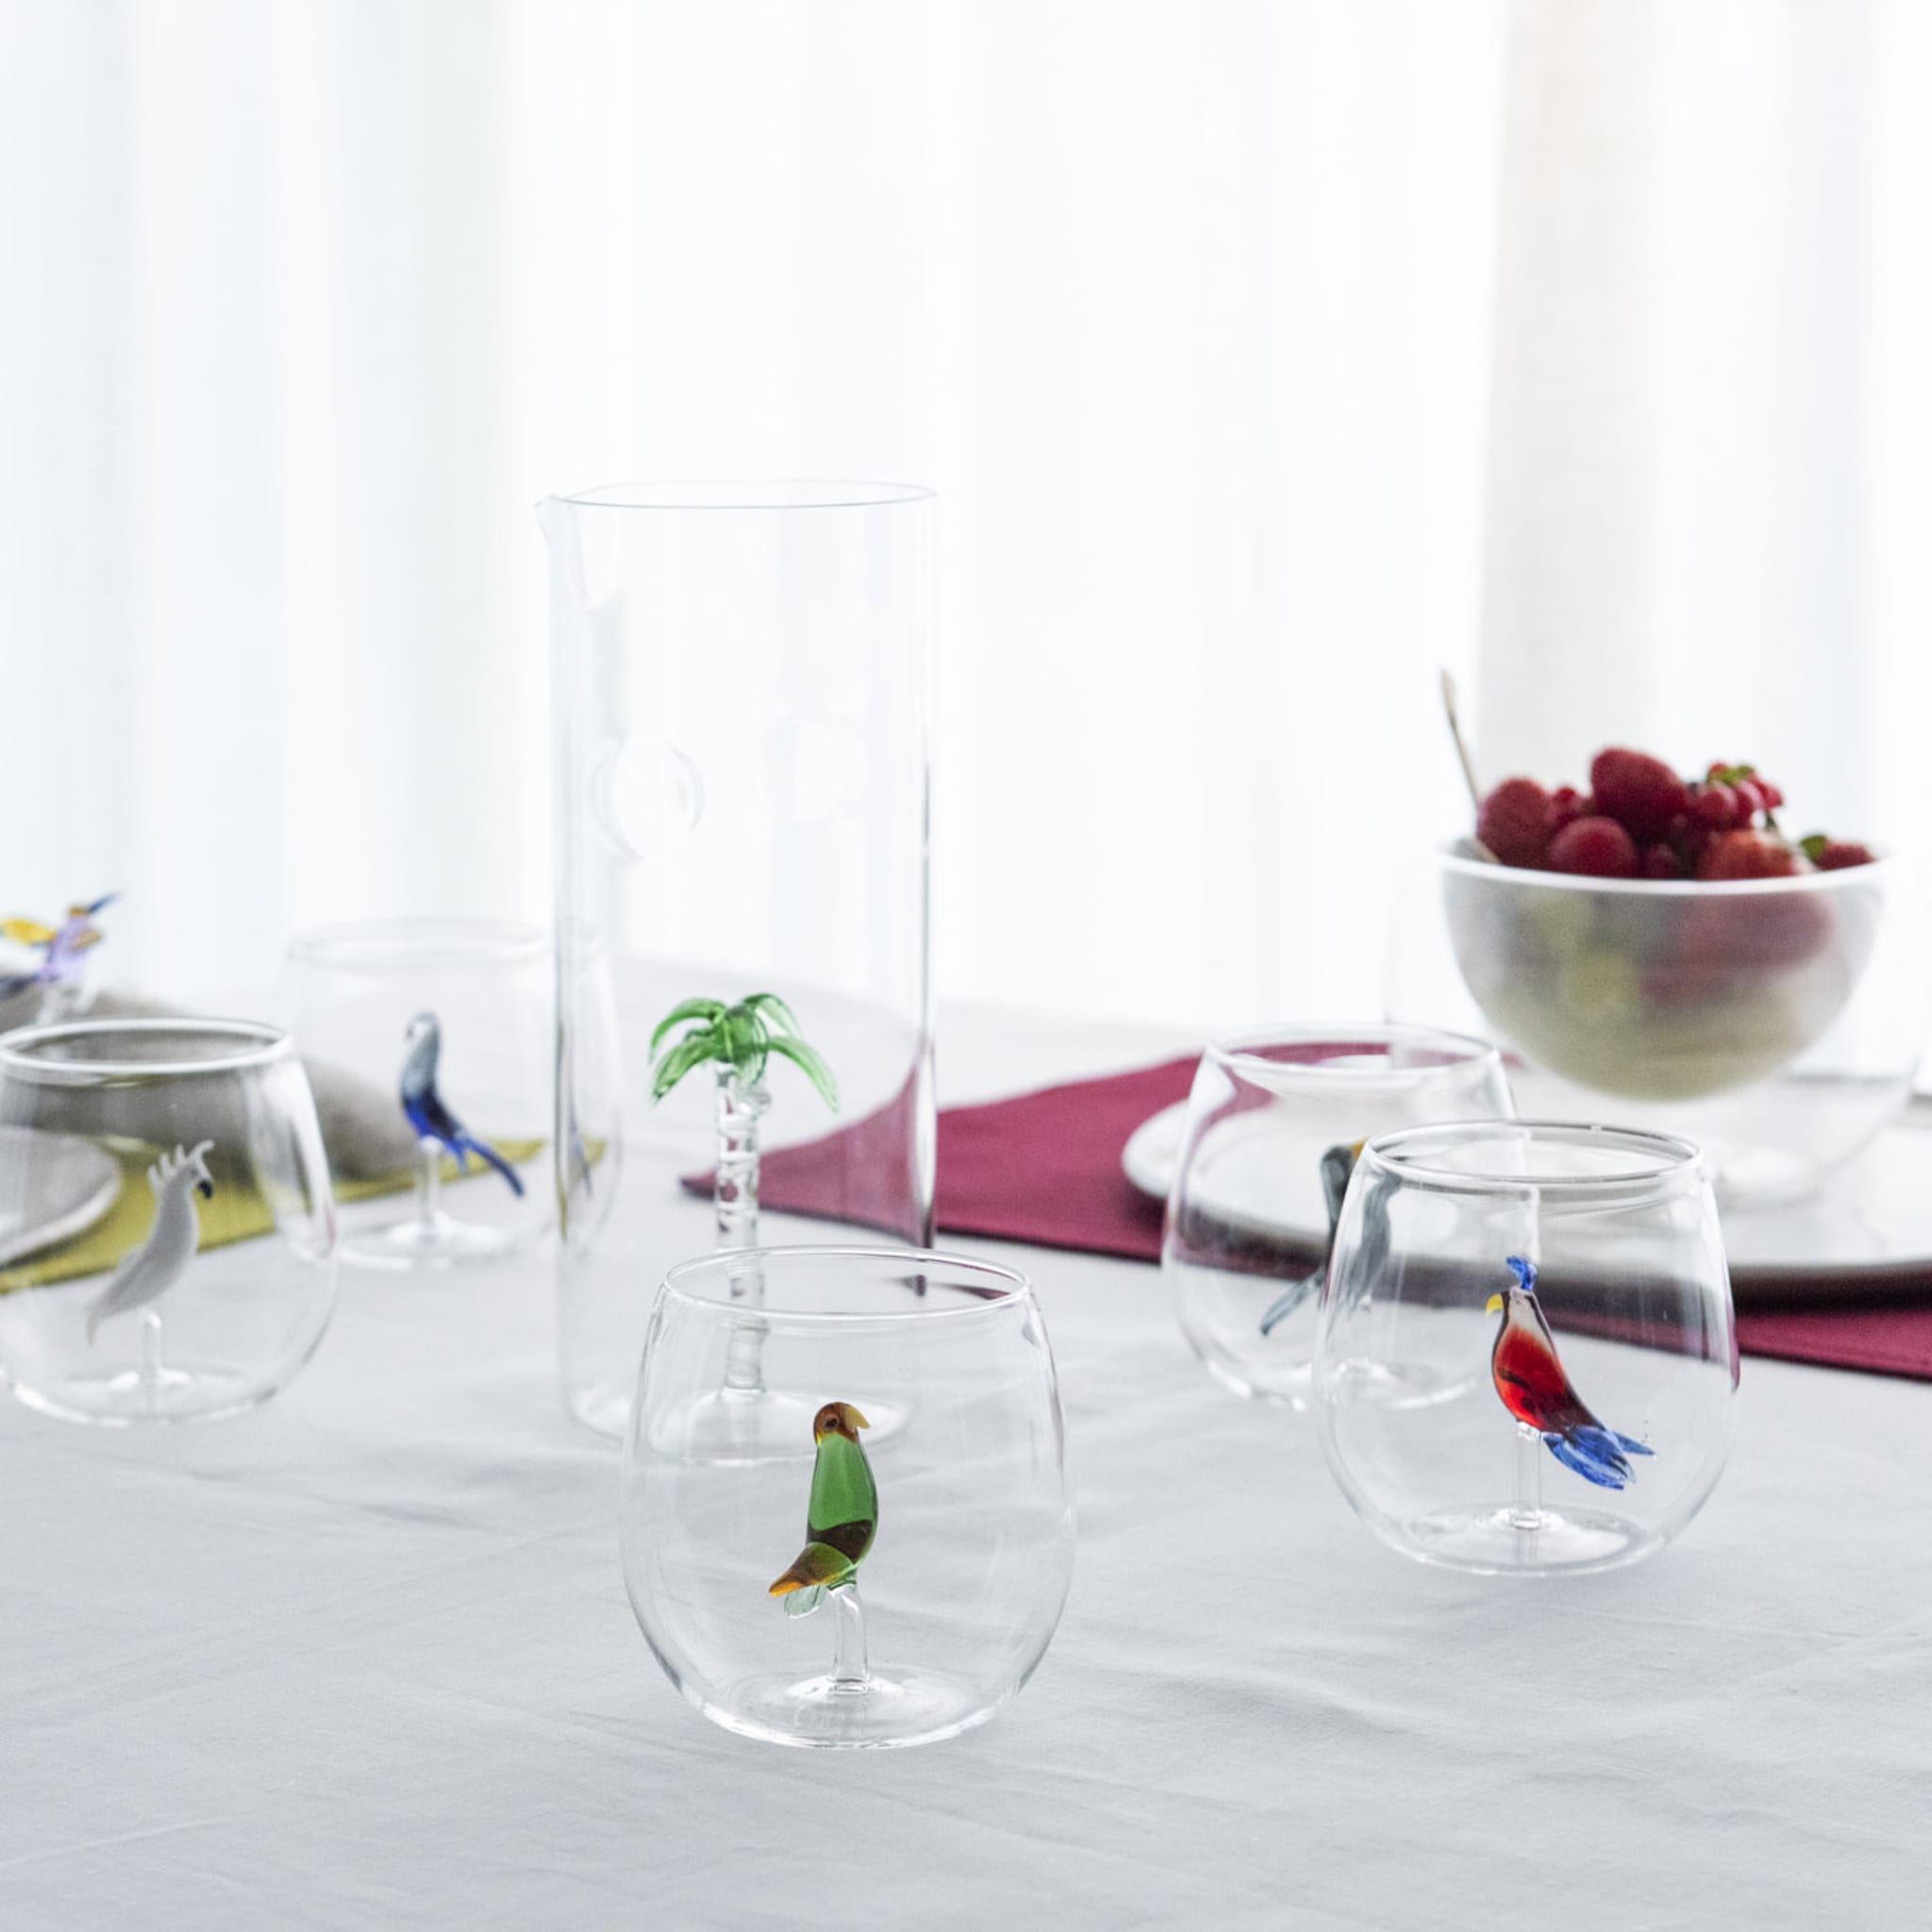 Palma Set of 4 Glasses and Pitcher - Alternative view 4